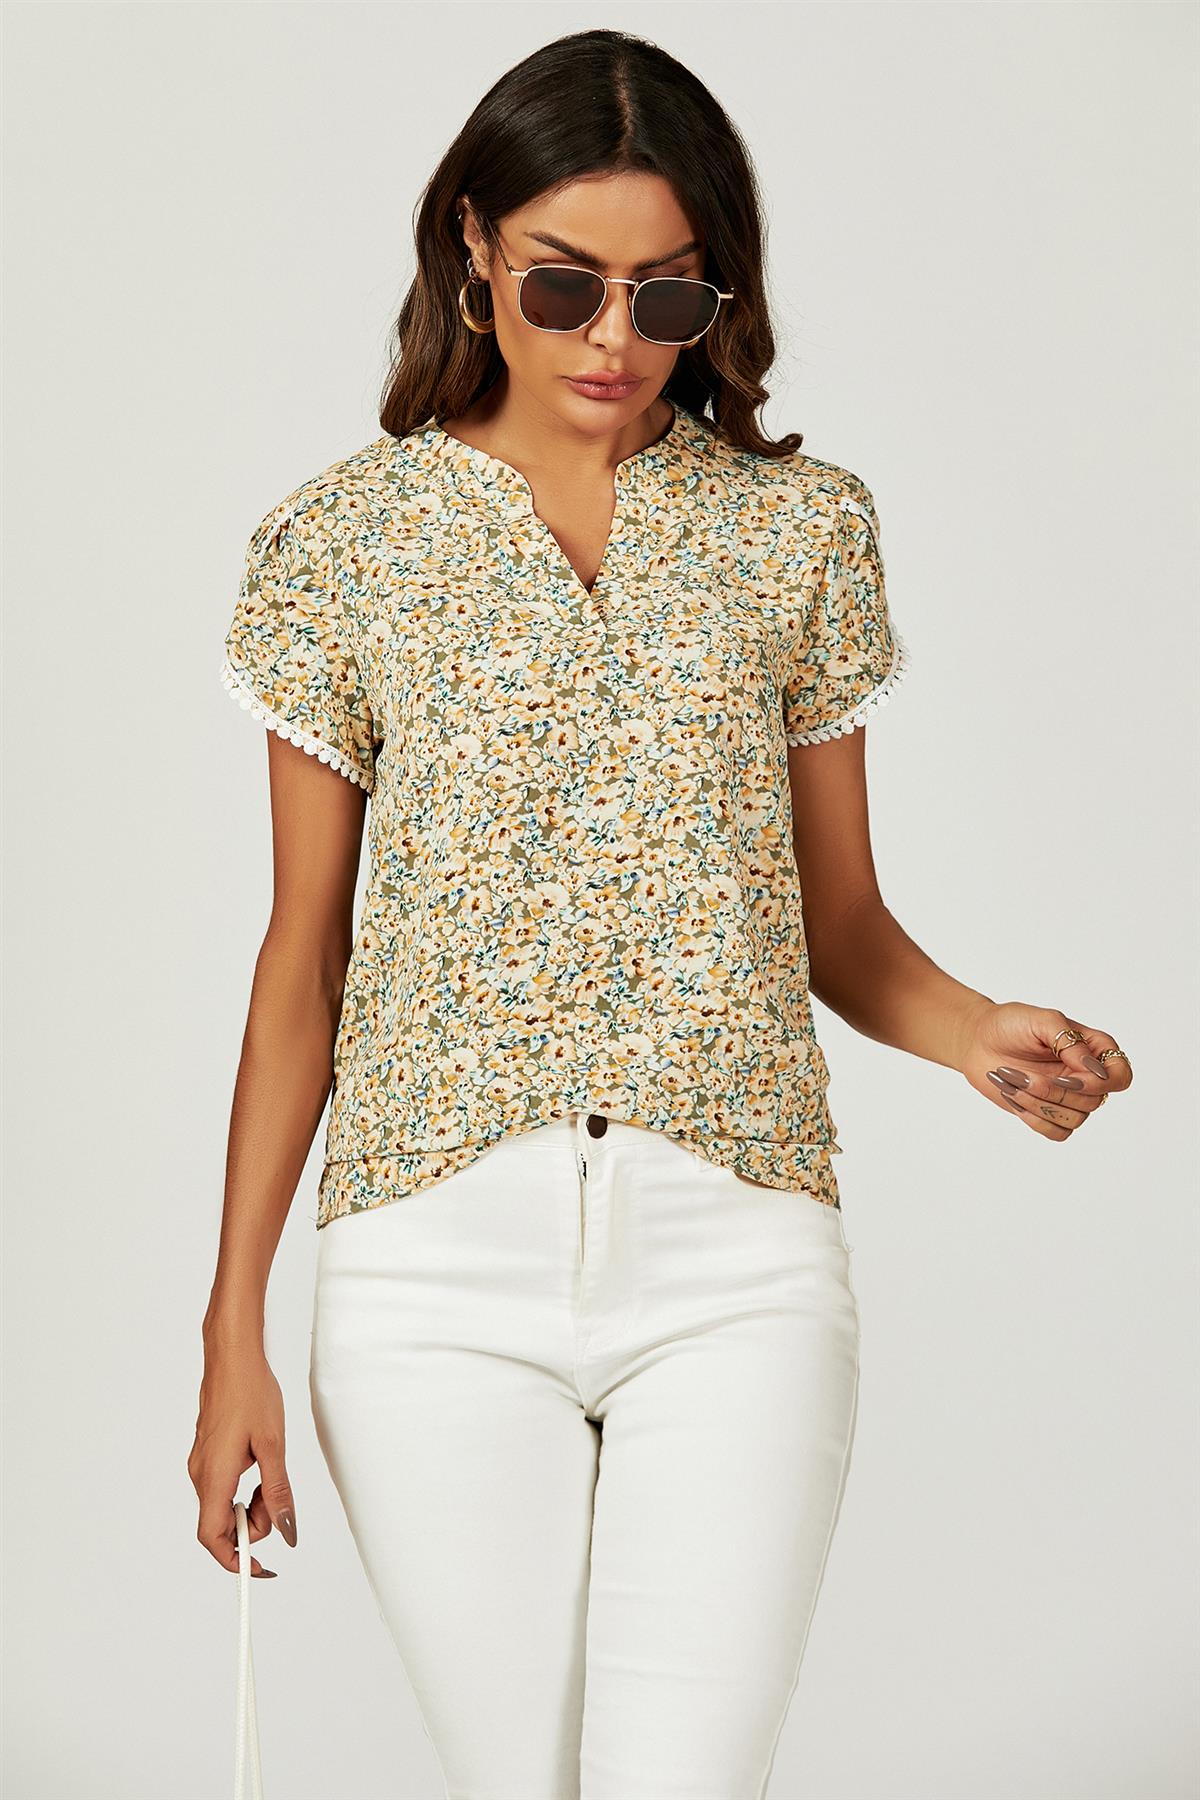 Floral Print Lace Trim Short Sleeve Blouse Top In Green Yellow FS649-GYF